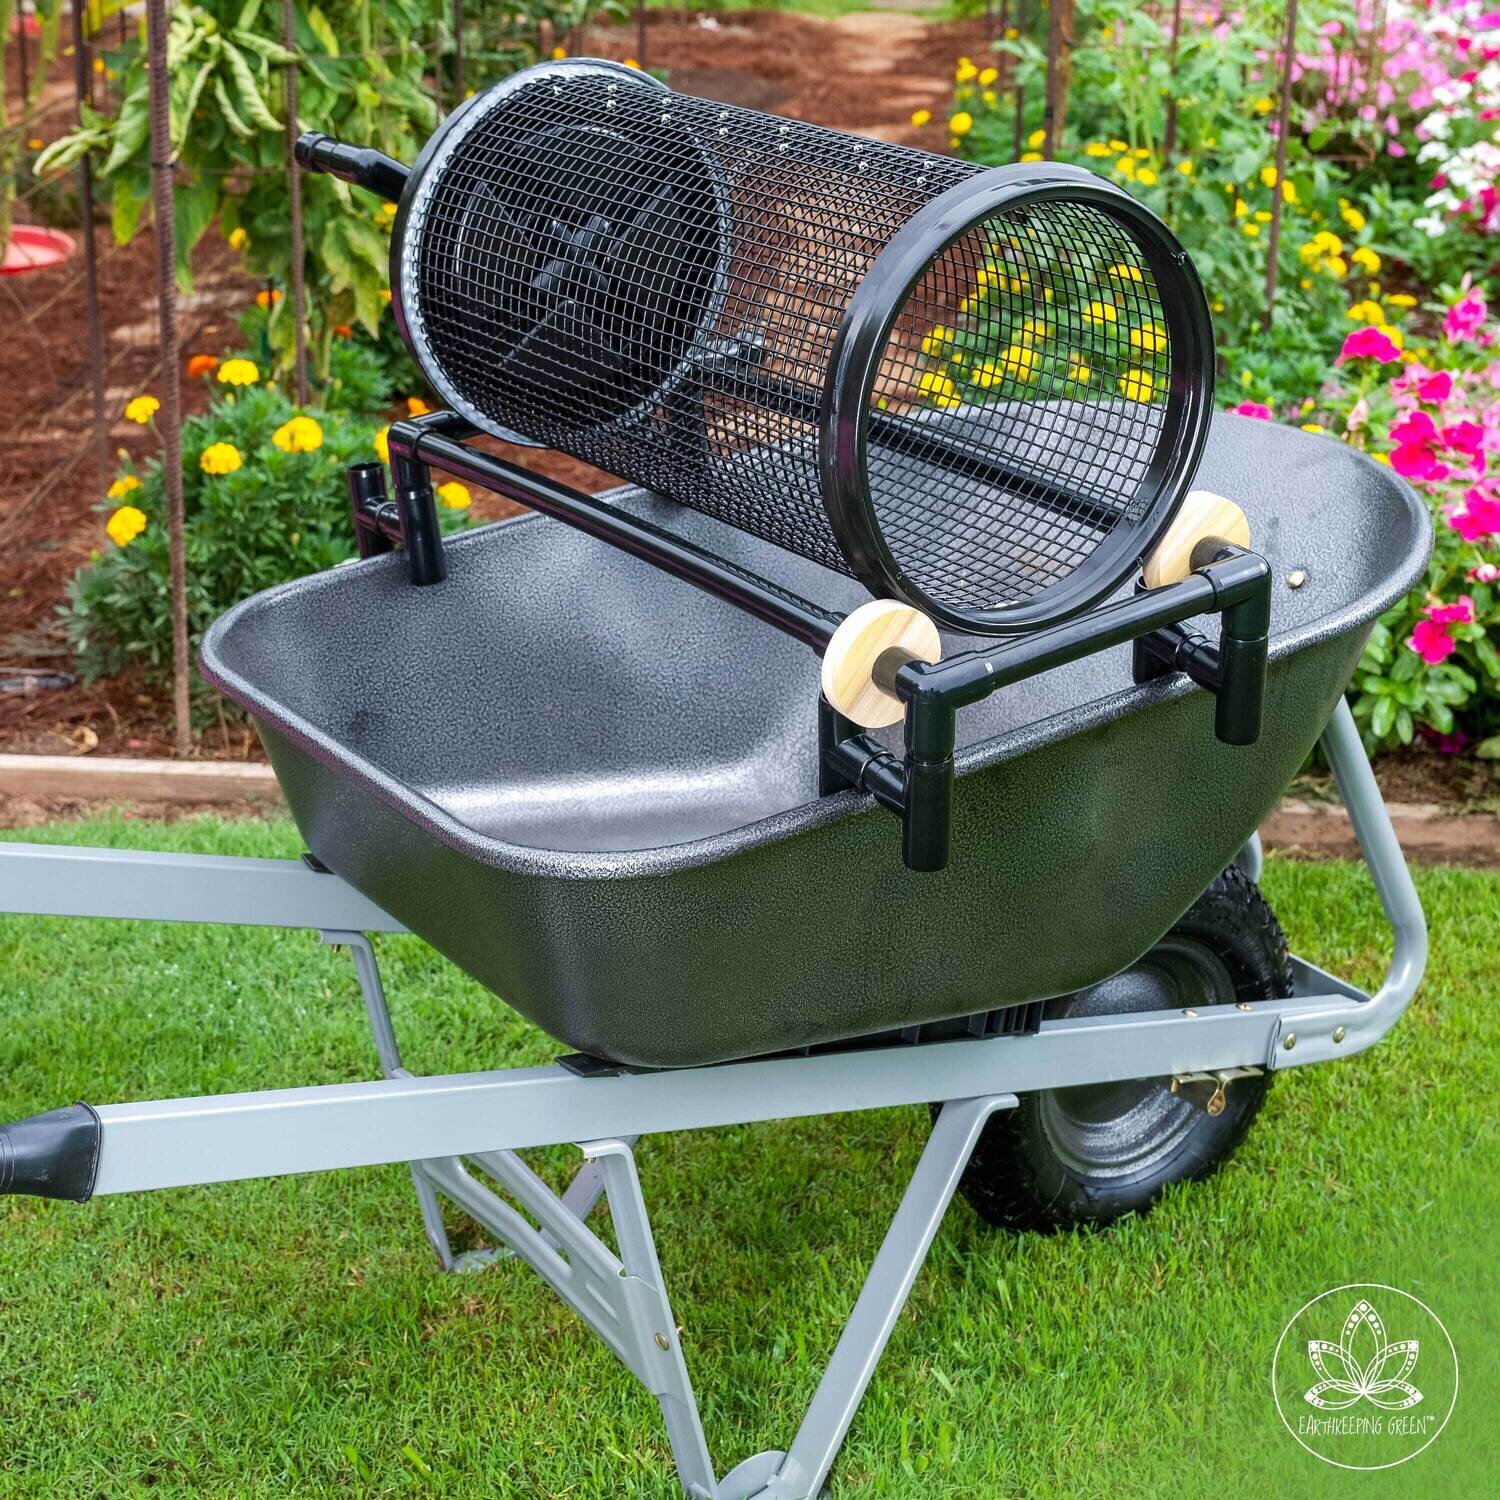 New Wheeled Rolling Garden Sifter heavy duty 19 gauge wire 1/2 inch screen. Additional 1/4 inch screen.
FREE SHIPPING inside USA continent!
NO SHIPPING TO AUSTRALIA (Sorry)